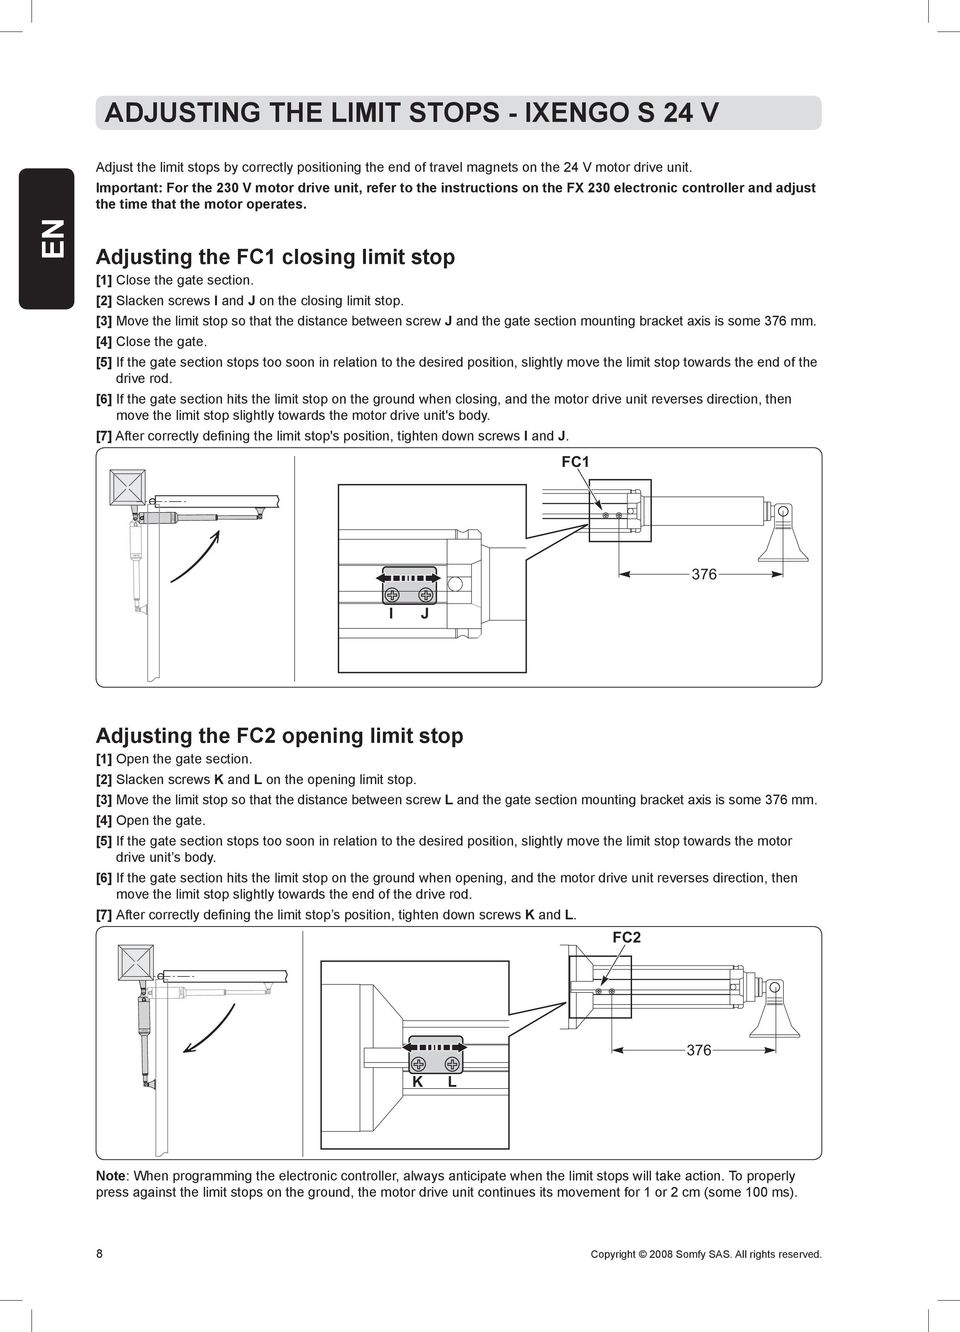 EN Adjusting the FC1 closing limit stop [1] Close the gate section. [2] Slacken screws I and J on the closing limit stop.